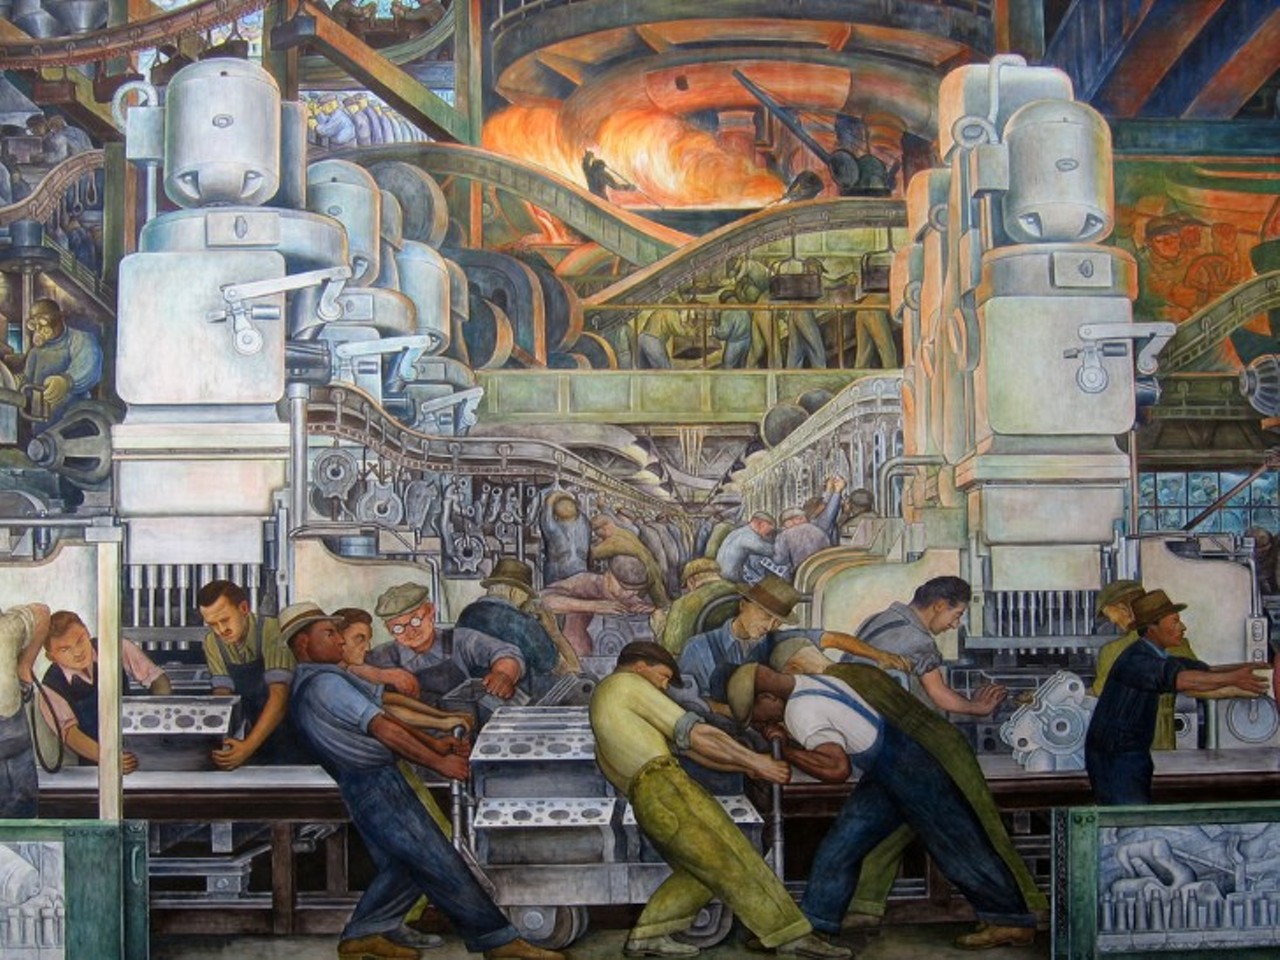 Enjoy artwork by the masters at Detroit Institute of Arts
5200 Woodward Ave., Detroit
The Detroit Institute of Arts is one of the world&#146;s largest art collections with over 100 galleries and is well-known for it&#146;s sprawling mural by famous Mexican artist, Diego Rivera.
Photo via James R. Martin/Shutterstock